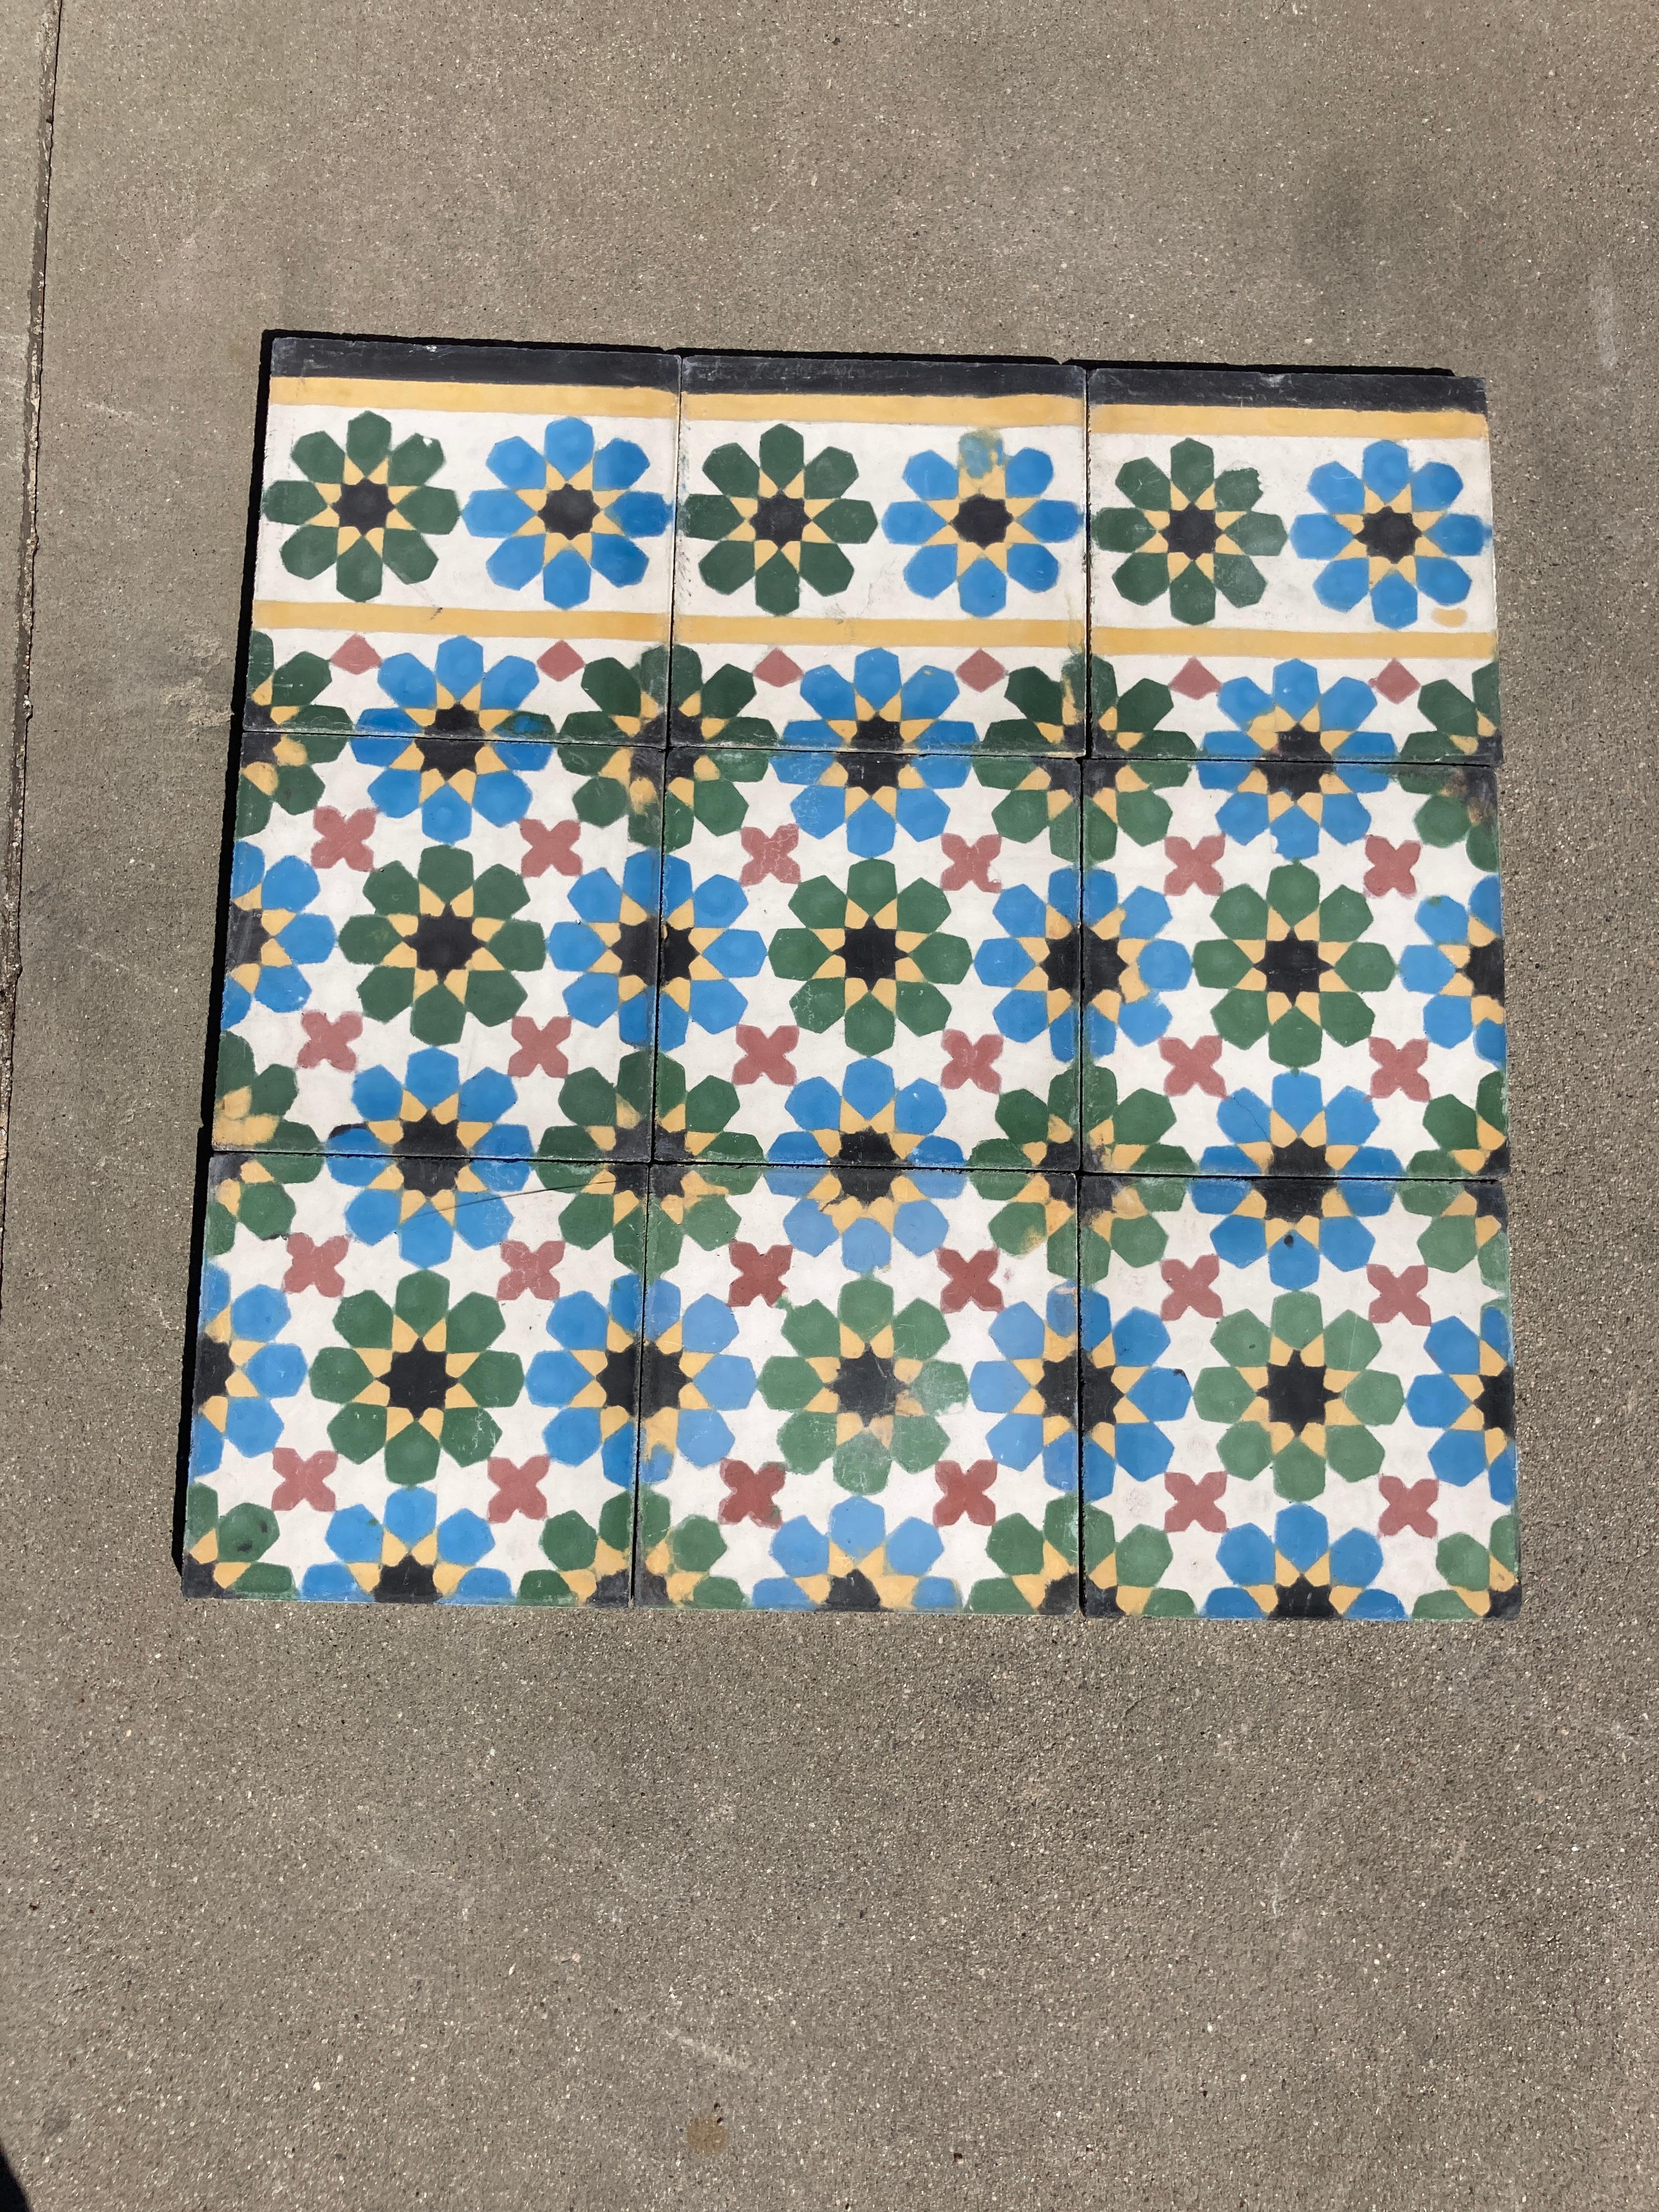 Moroccan handcrafted and hand-painted cement tile with traditional Fez Moorish Design.
Moroccan Hand-Painted Cement Tile with Traditional Fez Design
These are authentic Moroccan encaustic tiles hand made by artisans in Fez Morocco. 
This is the